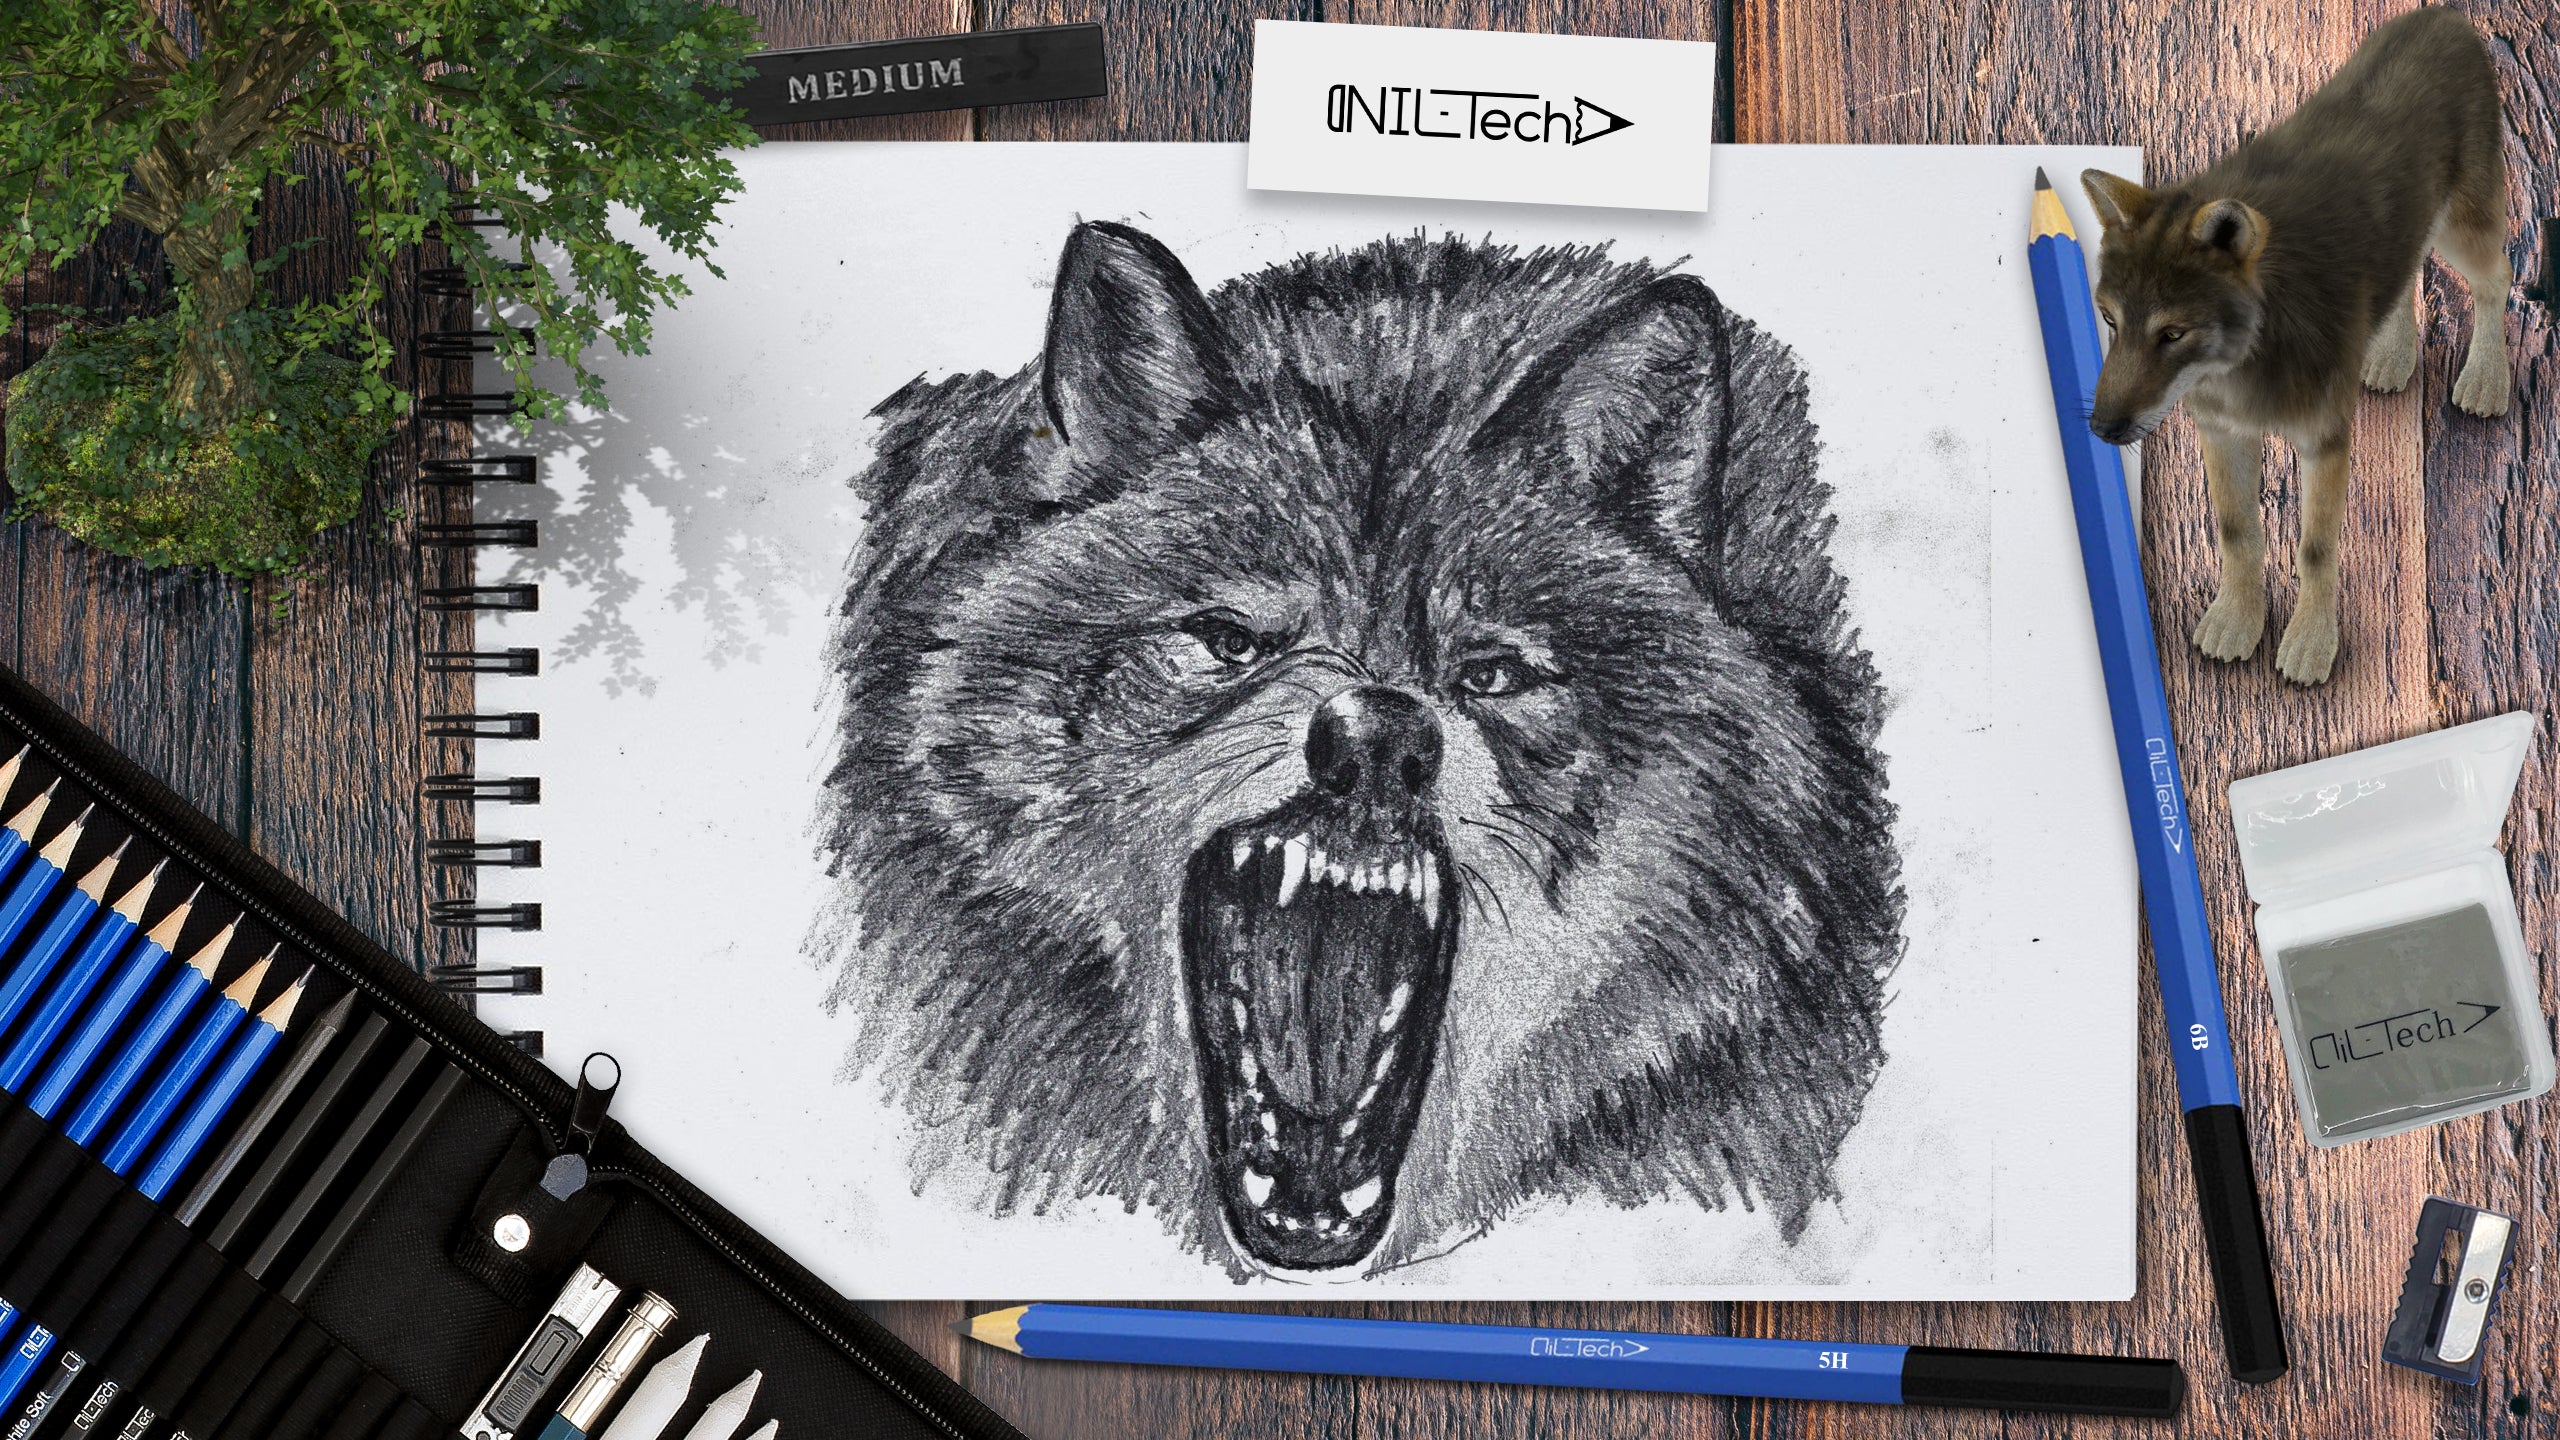 Realistic Wolf Head Drawing